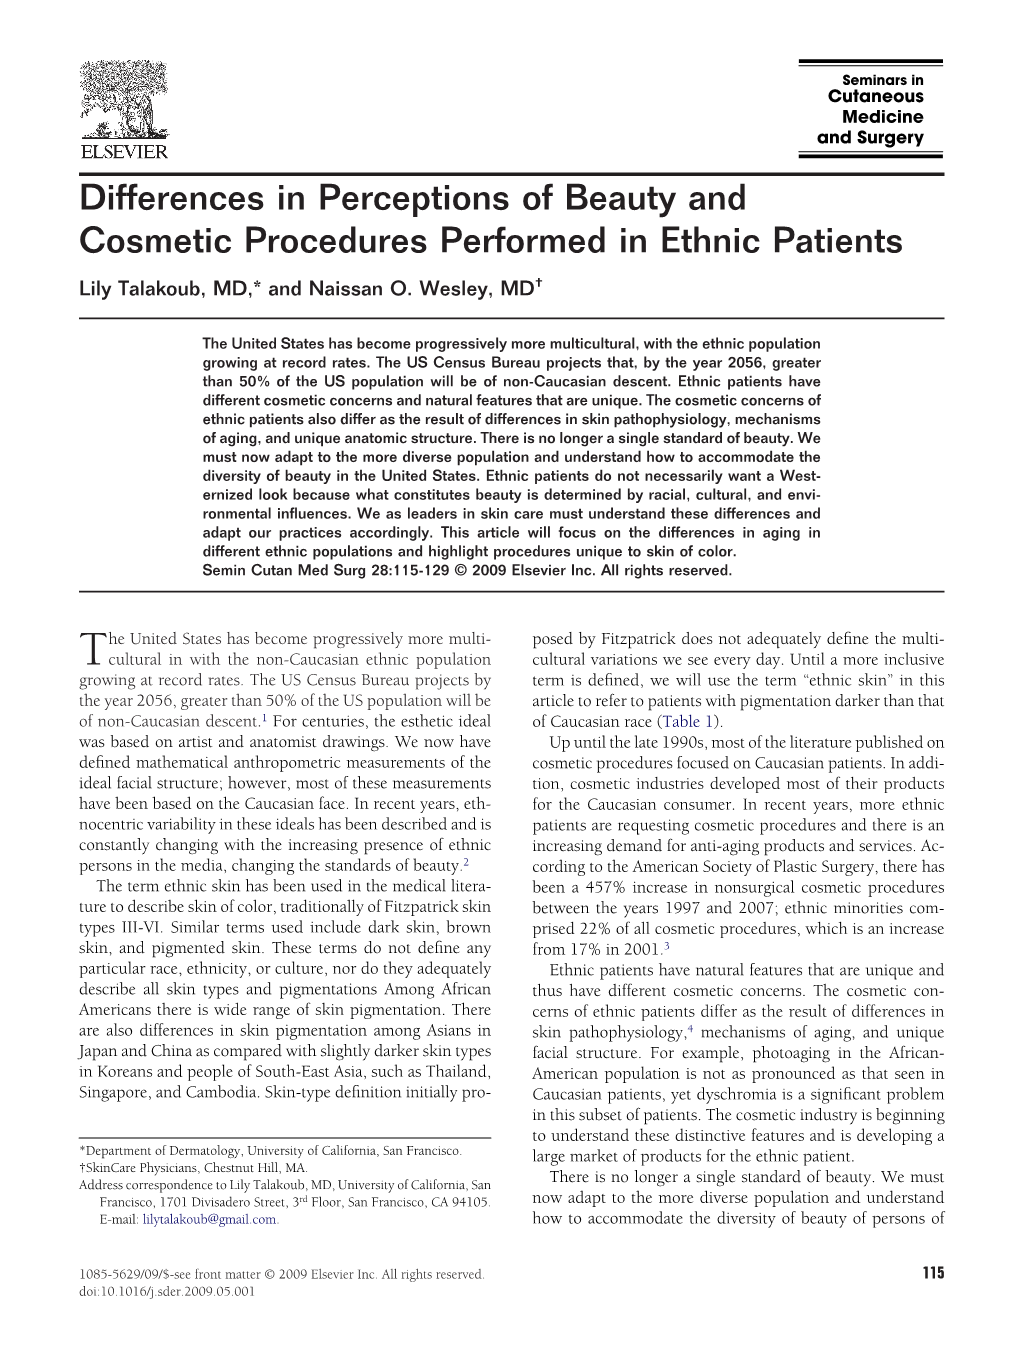 Differences in Perceptions of Beauty and Cosmetic Procedures Performed in Ethnic Patients Lily Talakoub, MD,* and Naissan O